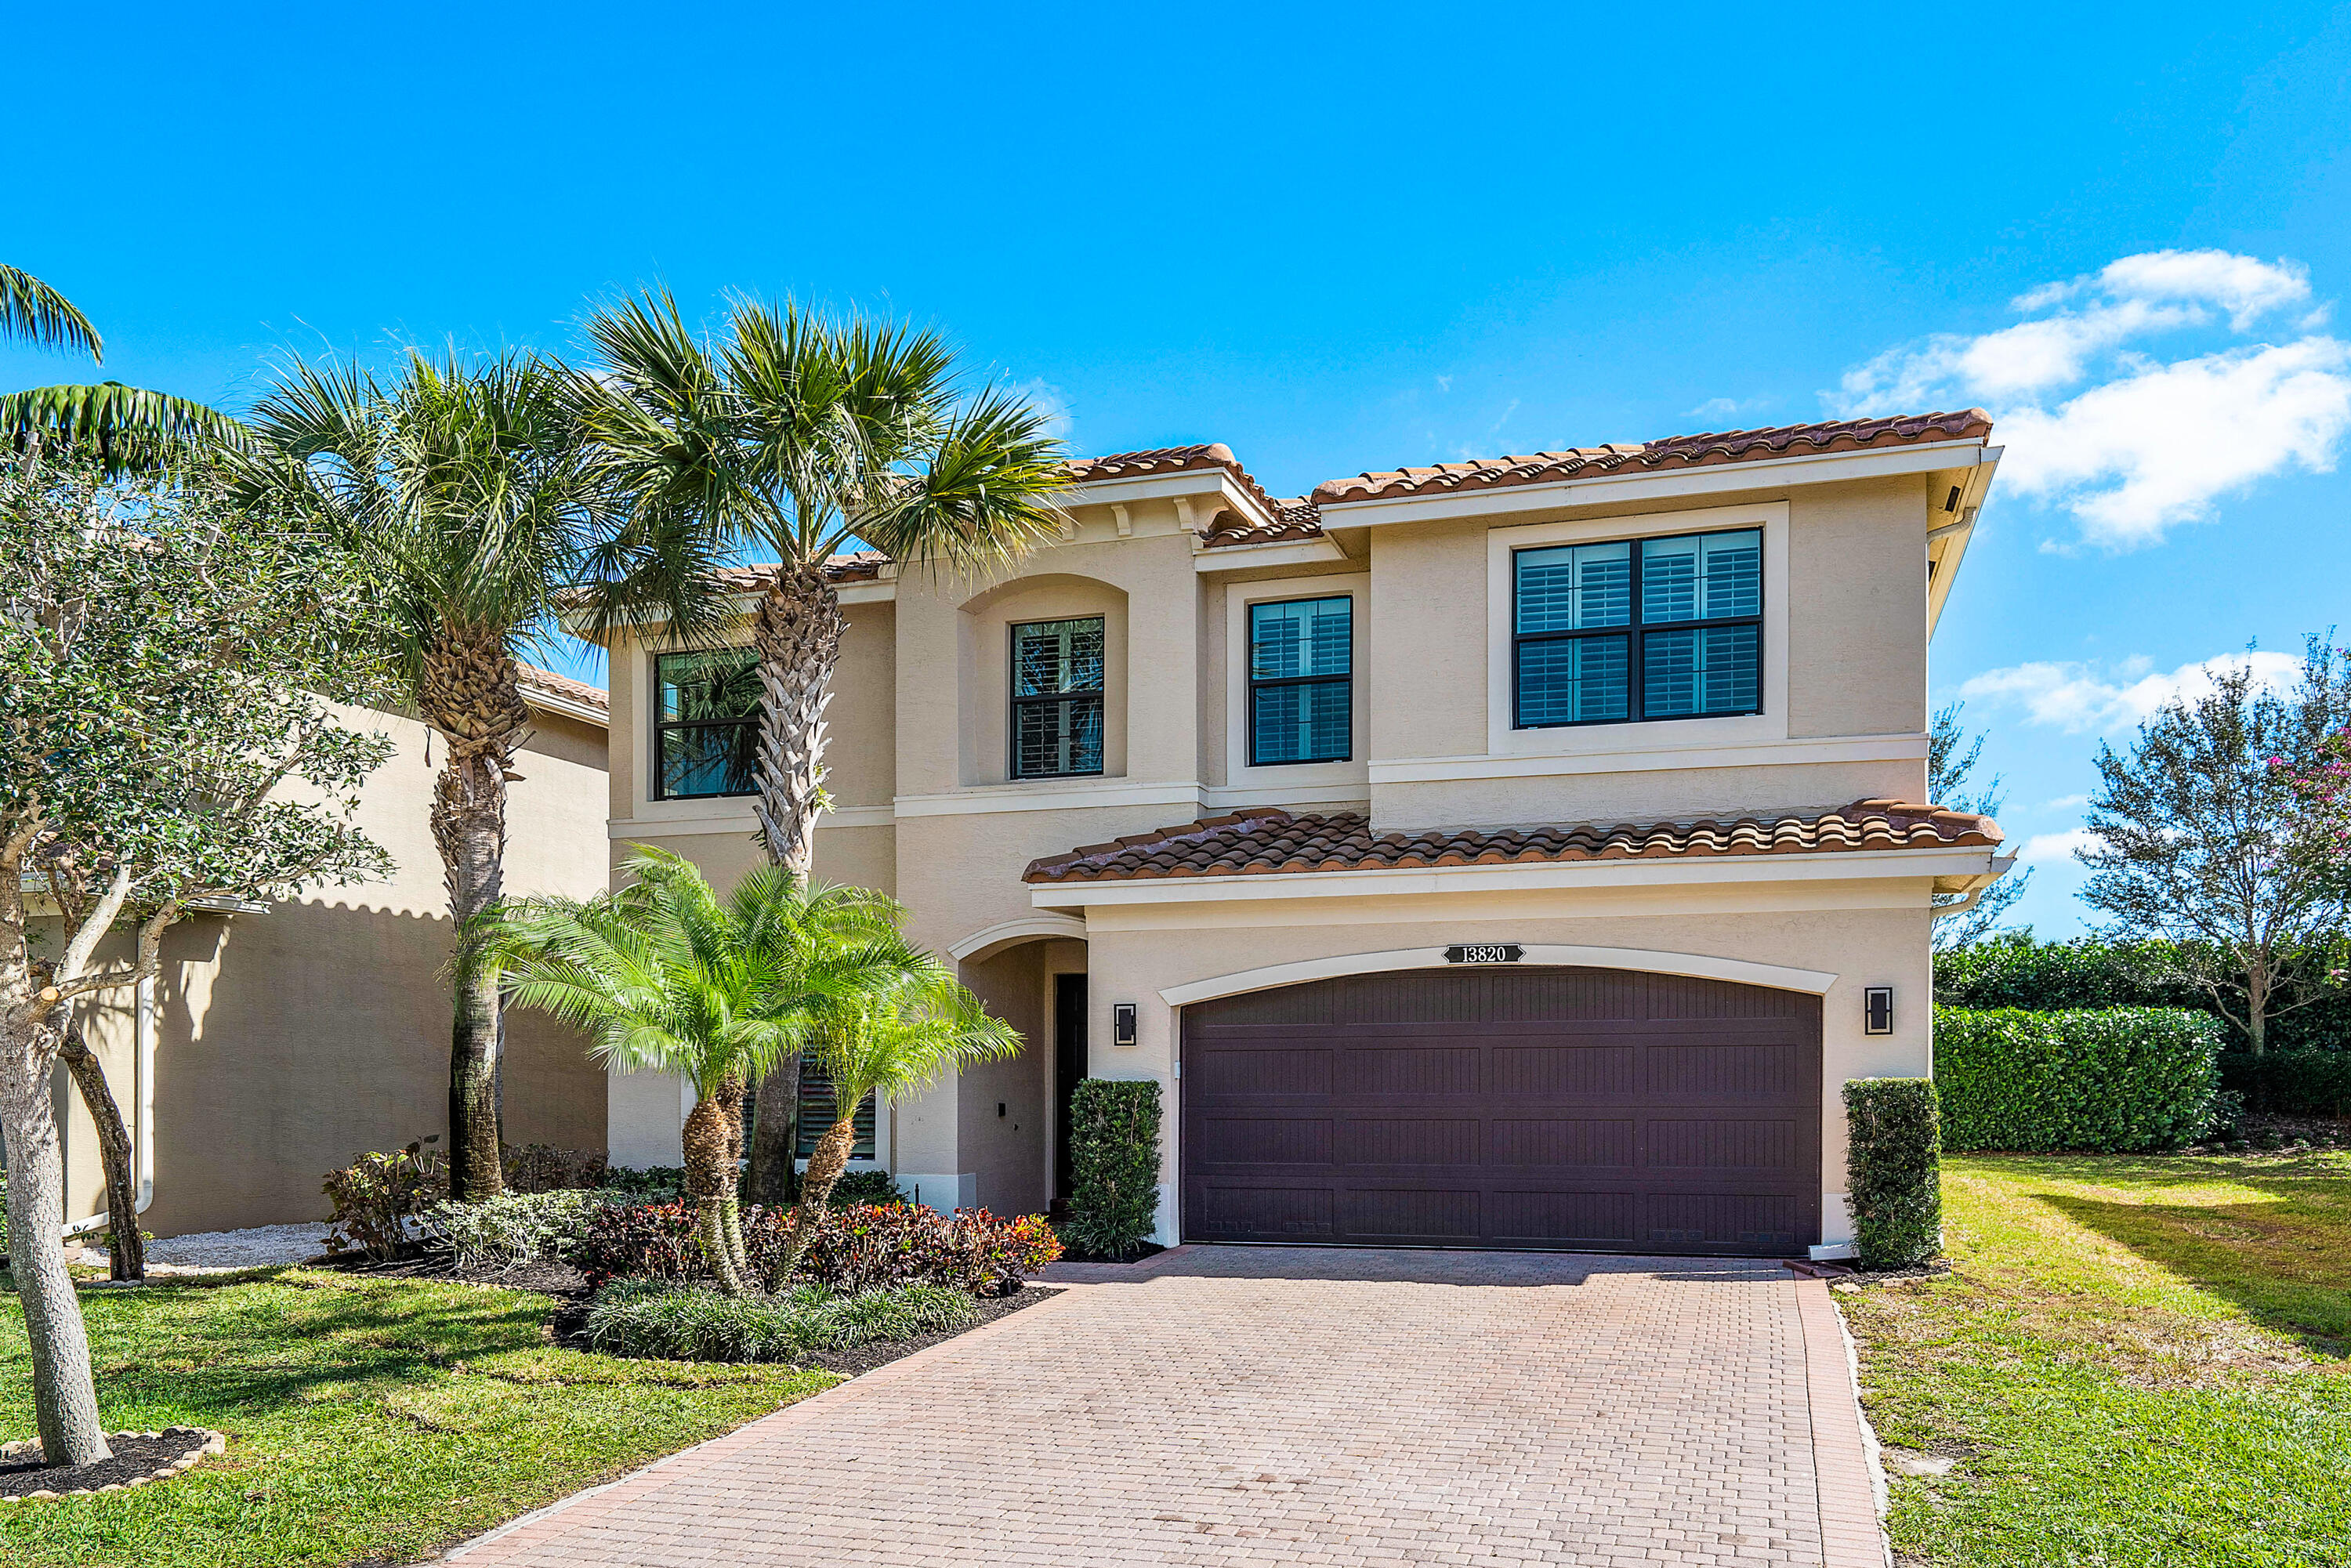 13820 Imperial Topaz Trail Trail, Delray Beach, Palm Beach County, Florida - 5 Bedrooms  
4 Bathrooms - 